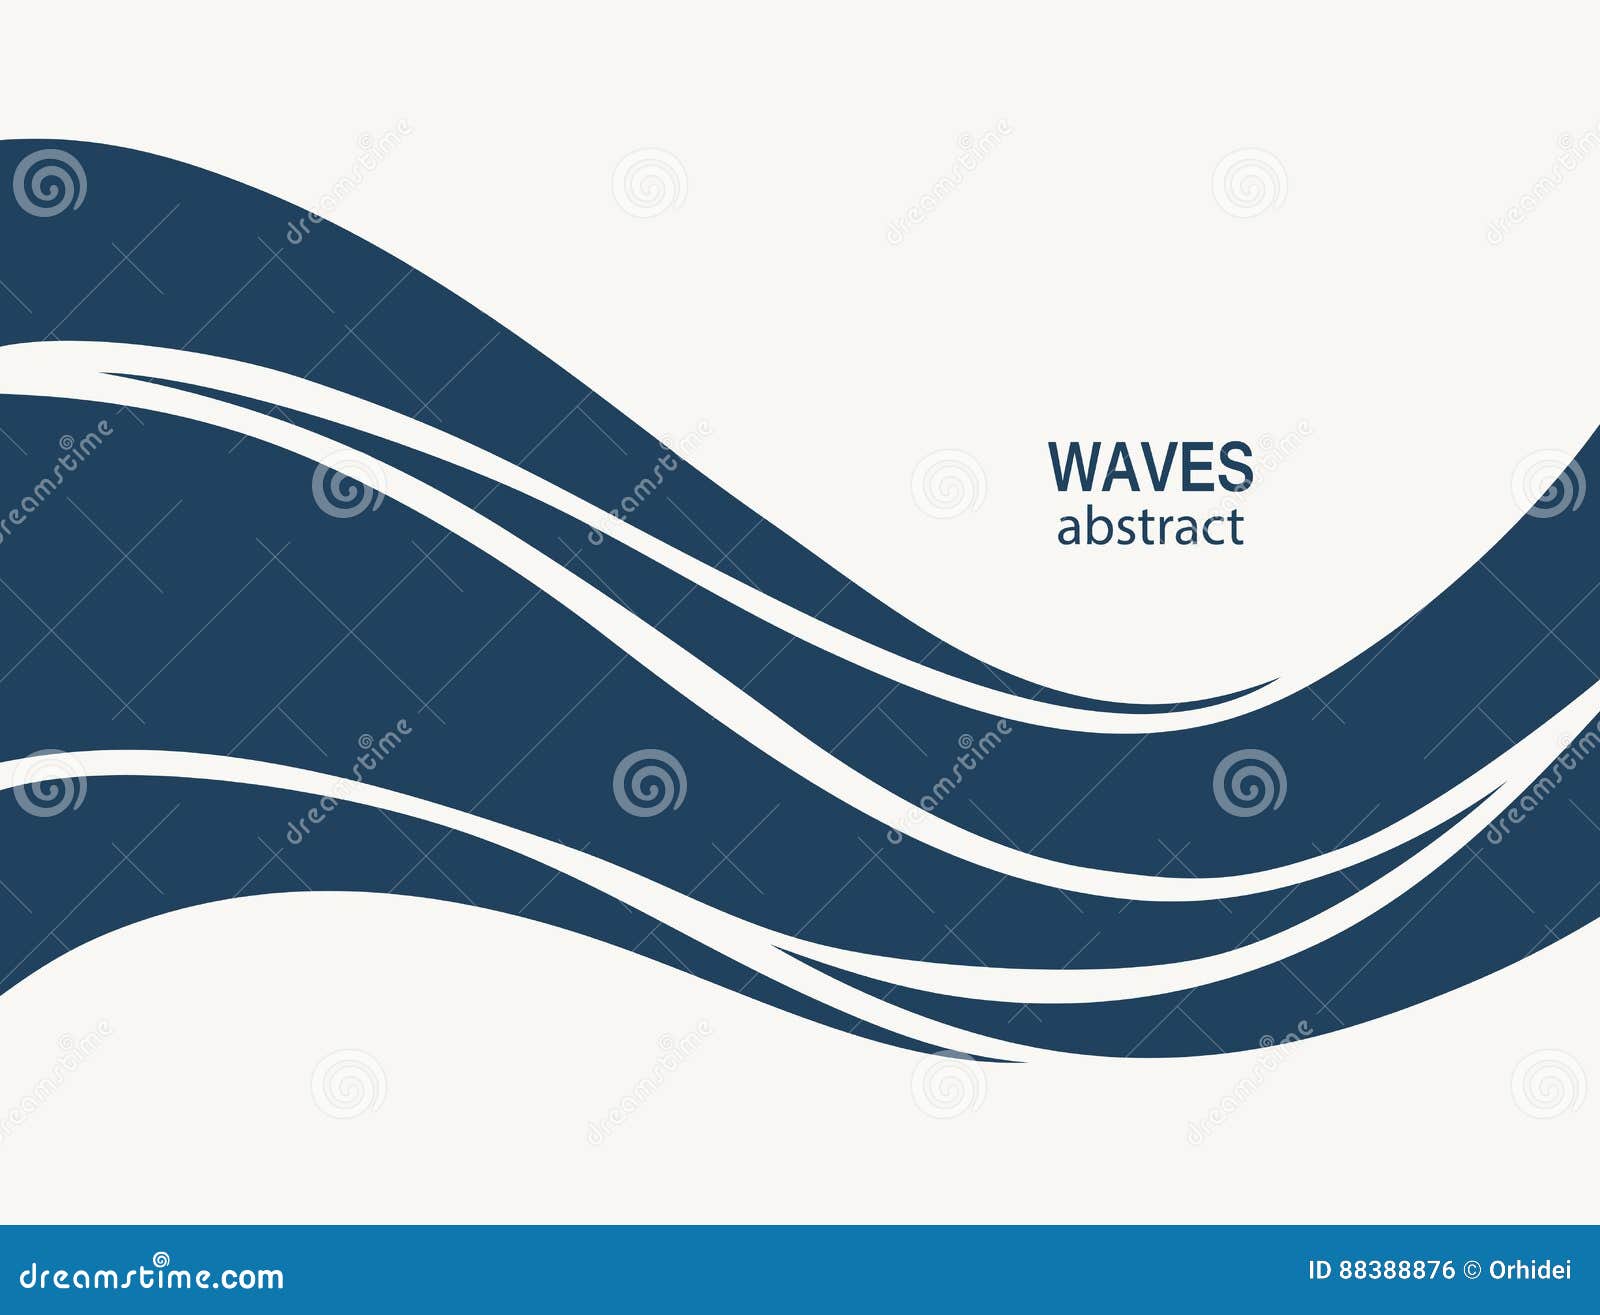 water wave logo abstract . cosmetics surf sport logotype c